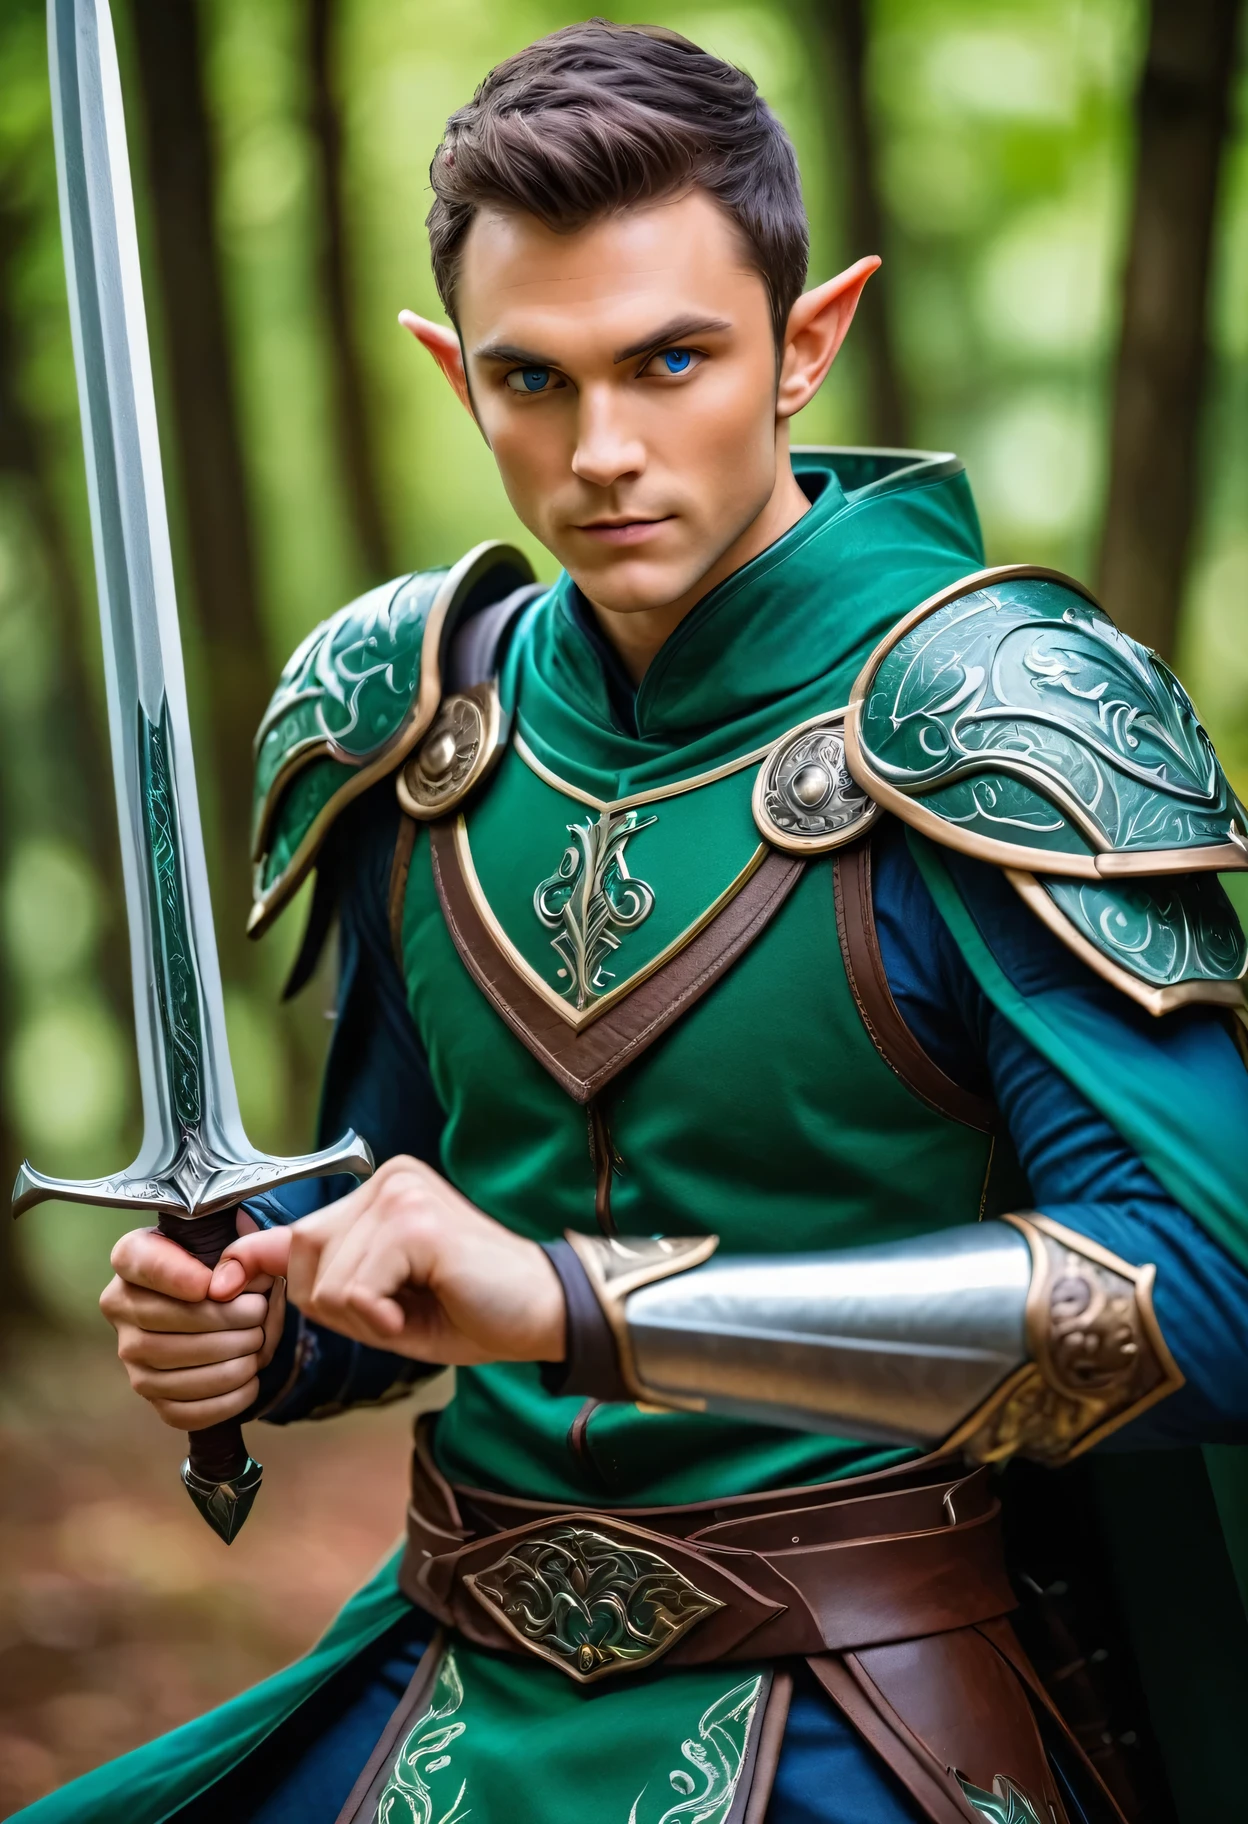 ProFessional photography For an elite magazine, An ElF warrior in gorgeous armor with intricate green painting, An ElF warrior posing, an elF blade made oF blue steel in his hand, an ElF warrior looking at the viewer, Full pose, Full body, swordsman's Fighting stance, yeux légèrement plissés, Appareil photo Canon EOS R5 avec objectif Canon RF 100-500 mm F4.5-7.1L EST USM, 500 millimètres, 1/500 s., F/7.1 et ISO 1000.